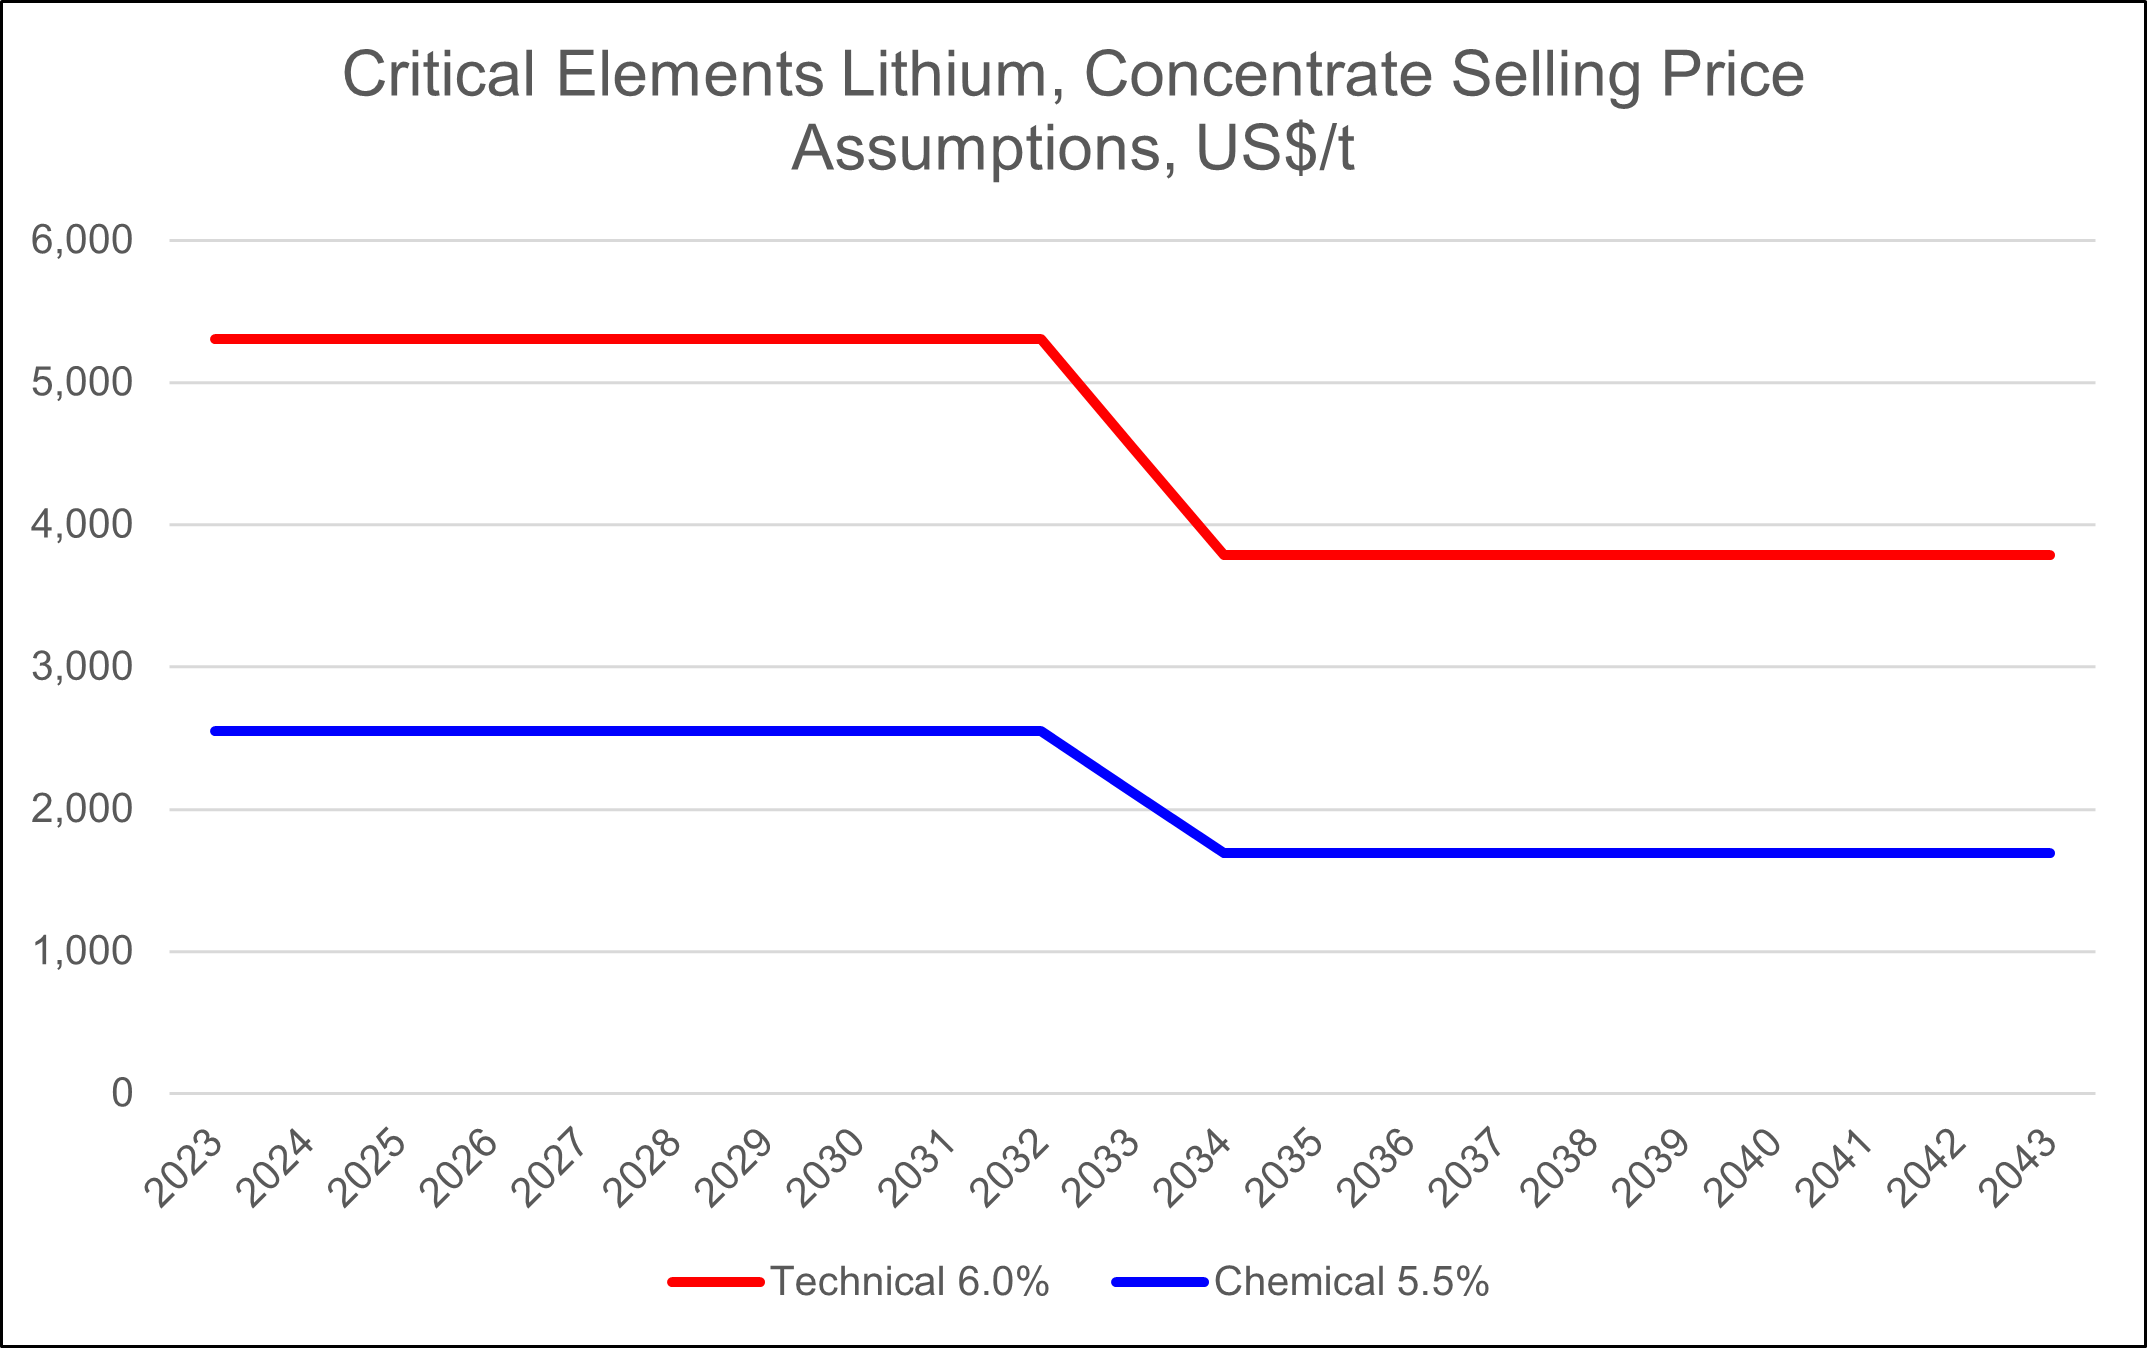 Critical Elements Lithium Corporation, Tuesday, August 29, 2023, Press release picture